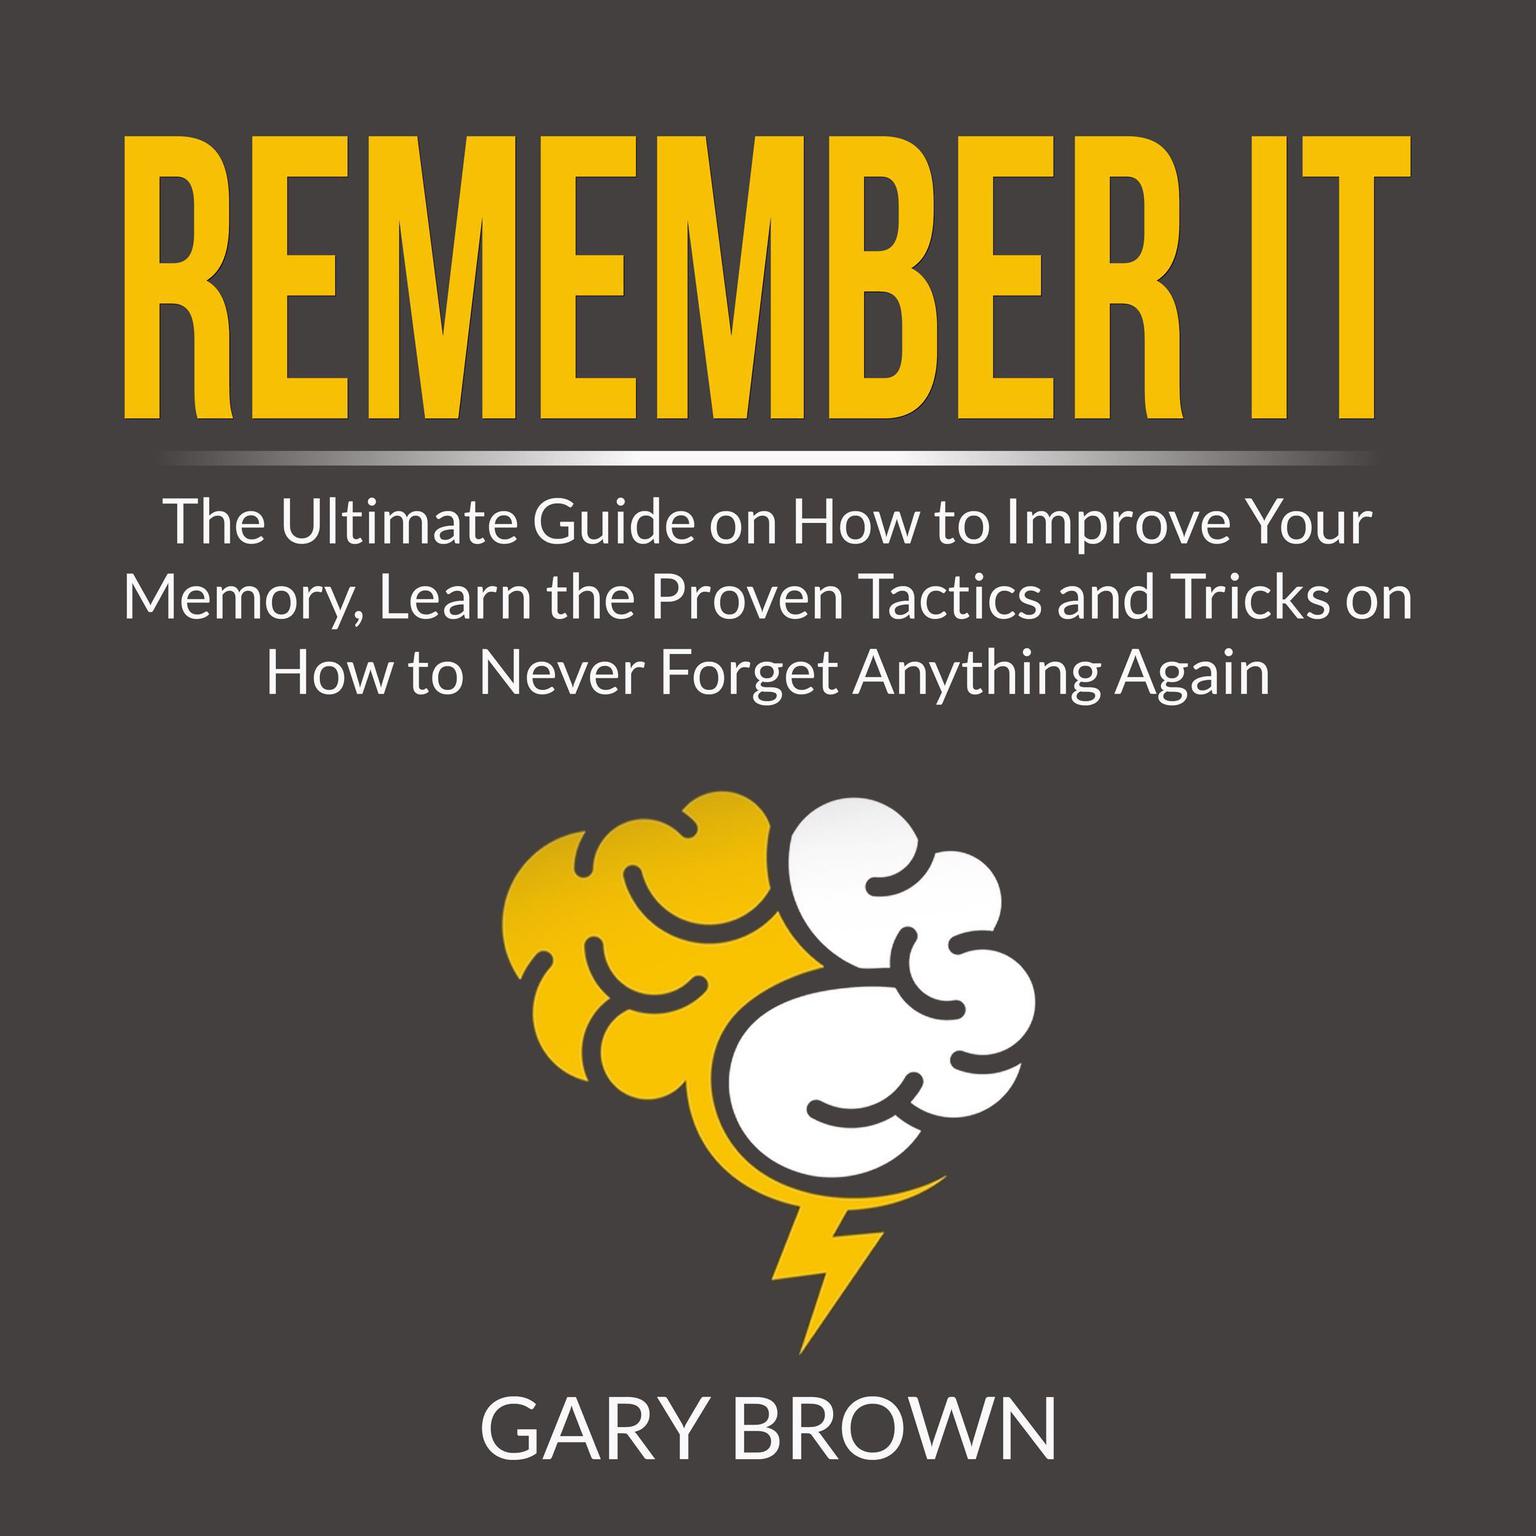 Remember It: The Ultimate Guide on How to Improve Your Memory, Learn the Proven Tactics and Tricks on How to Never Forget Anything Again Audiobook, by Gary Brown